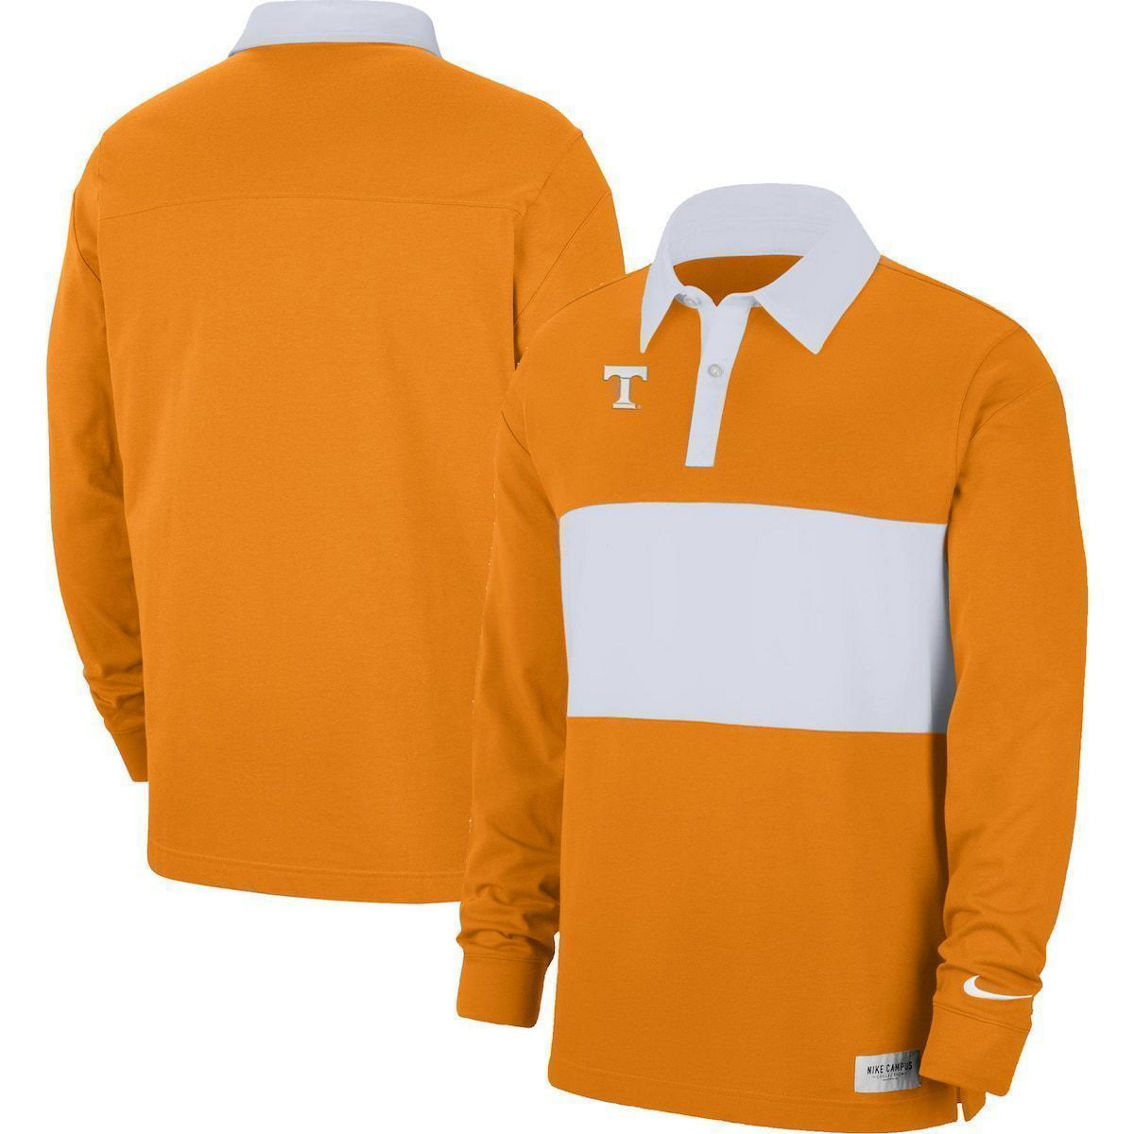 Nike Men's Tennessee Orange Tennessee Volunteers Striped Long Sleeve Polo - Image 2 of 4